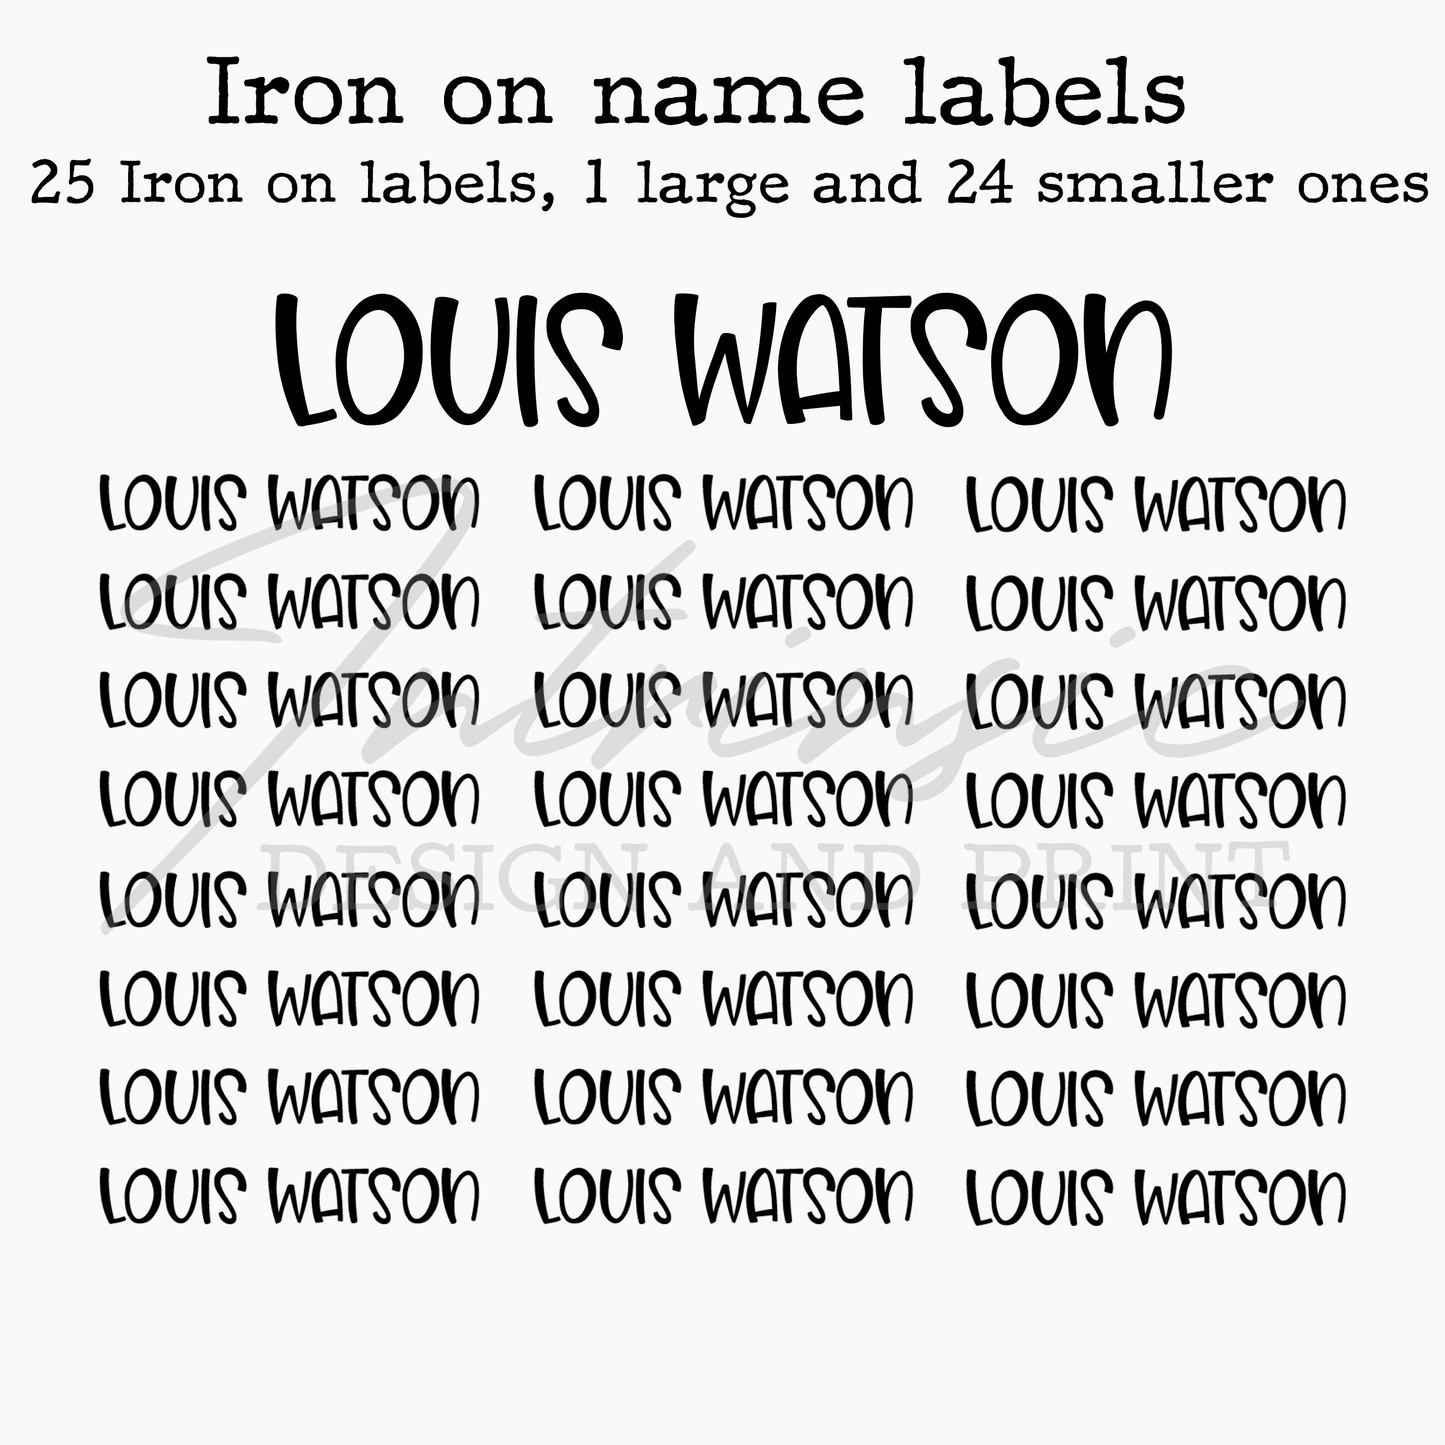 Iron on labels